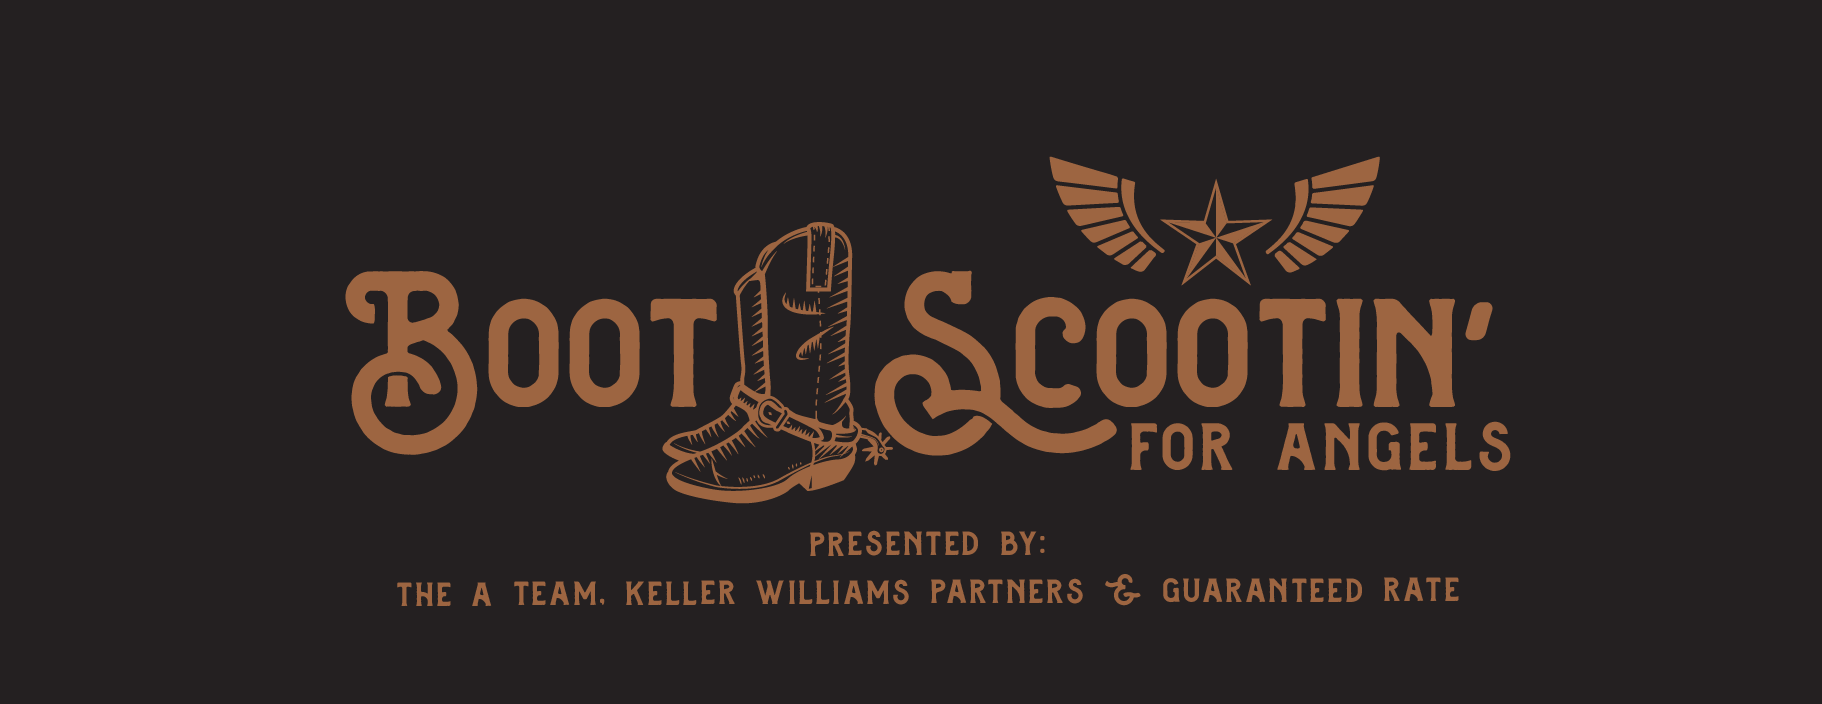 Boot Scootin' for Angels